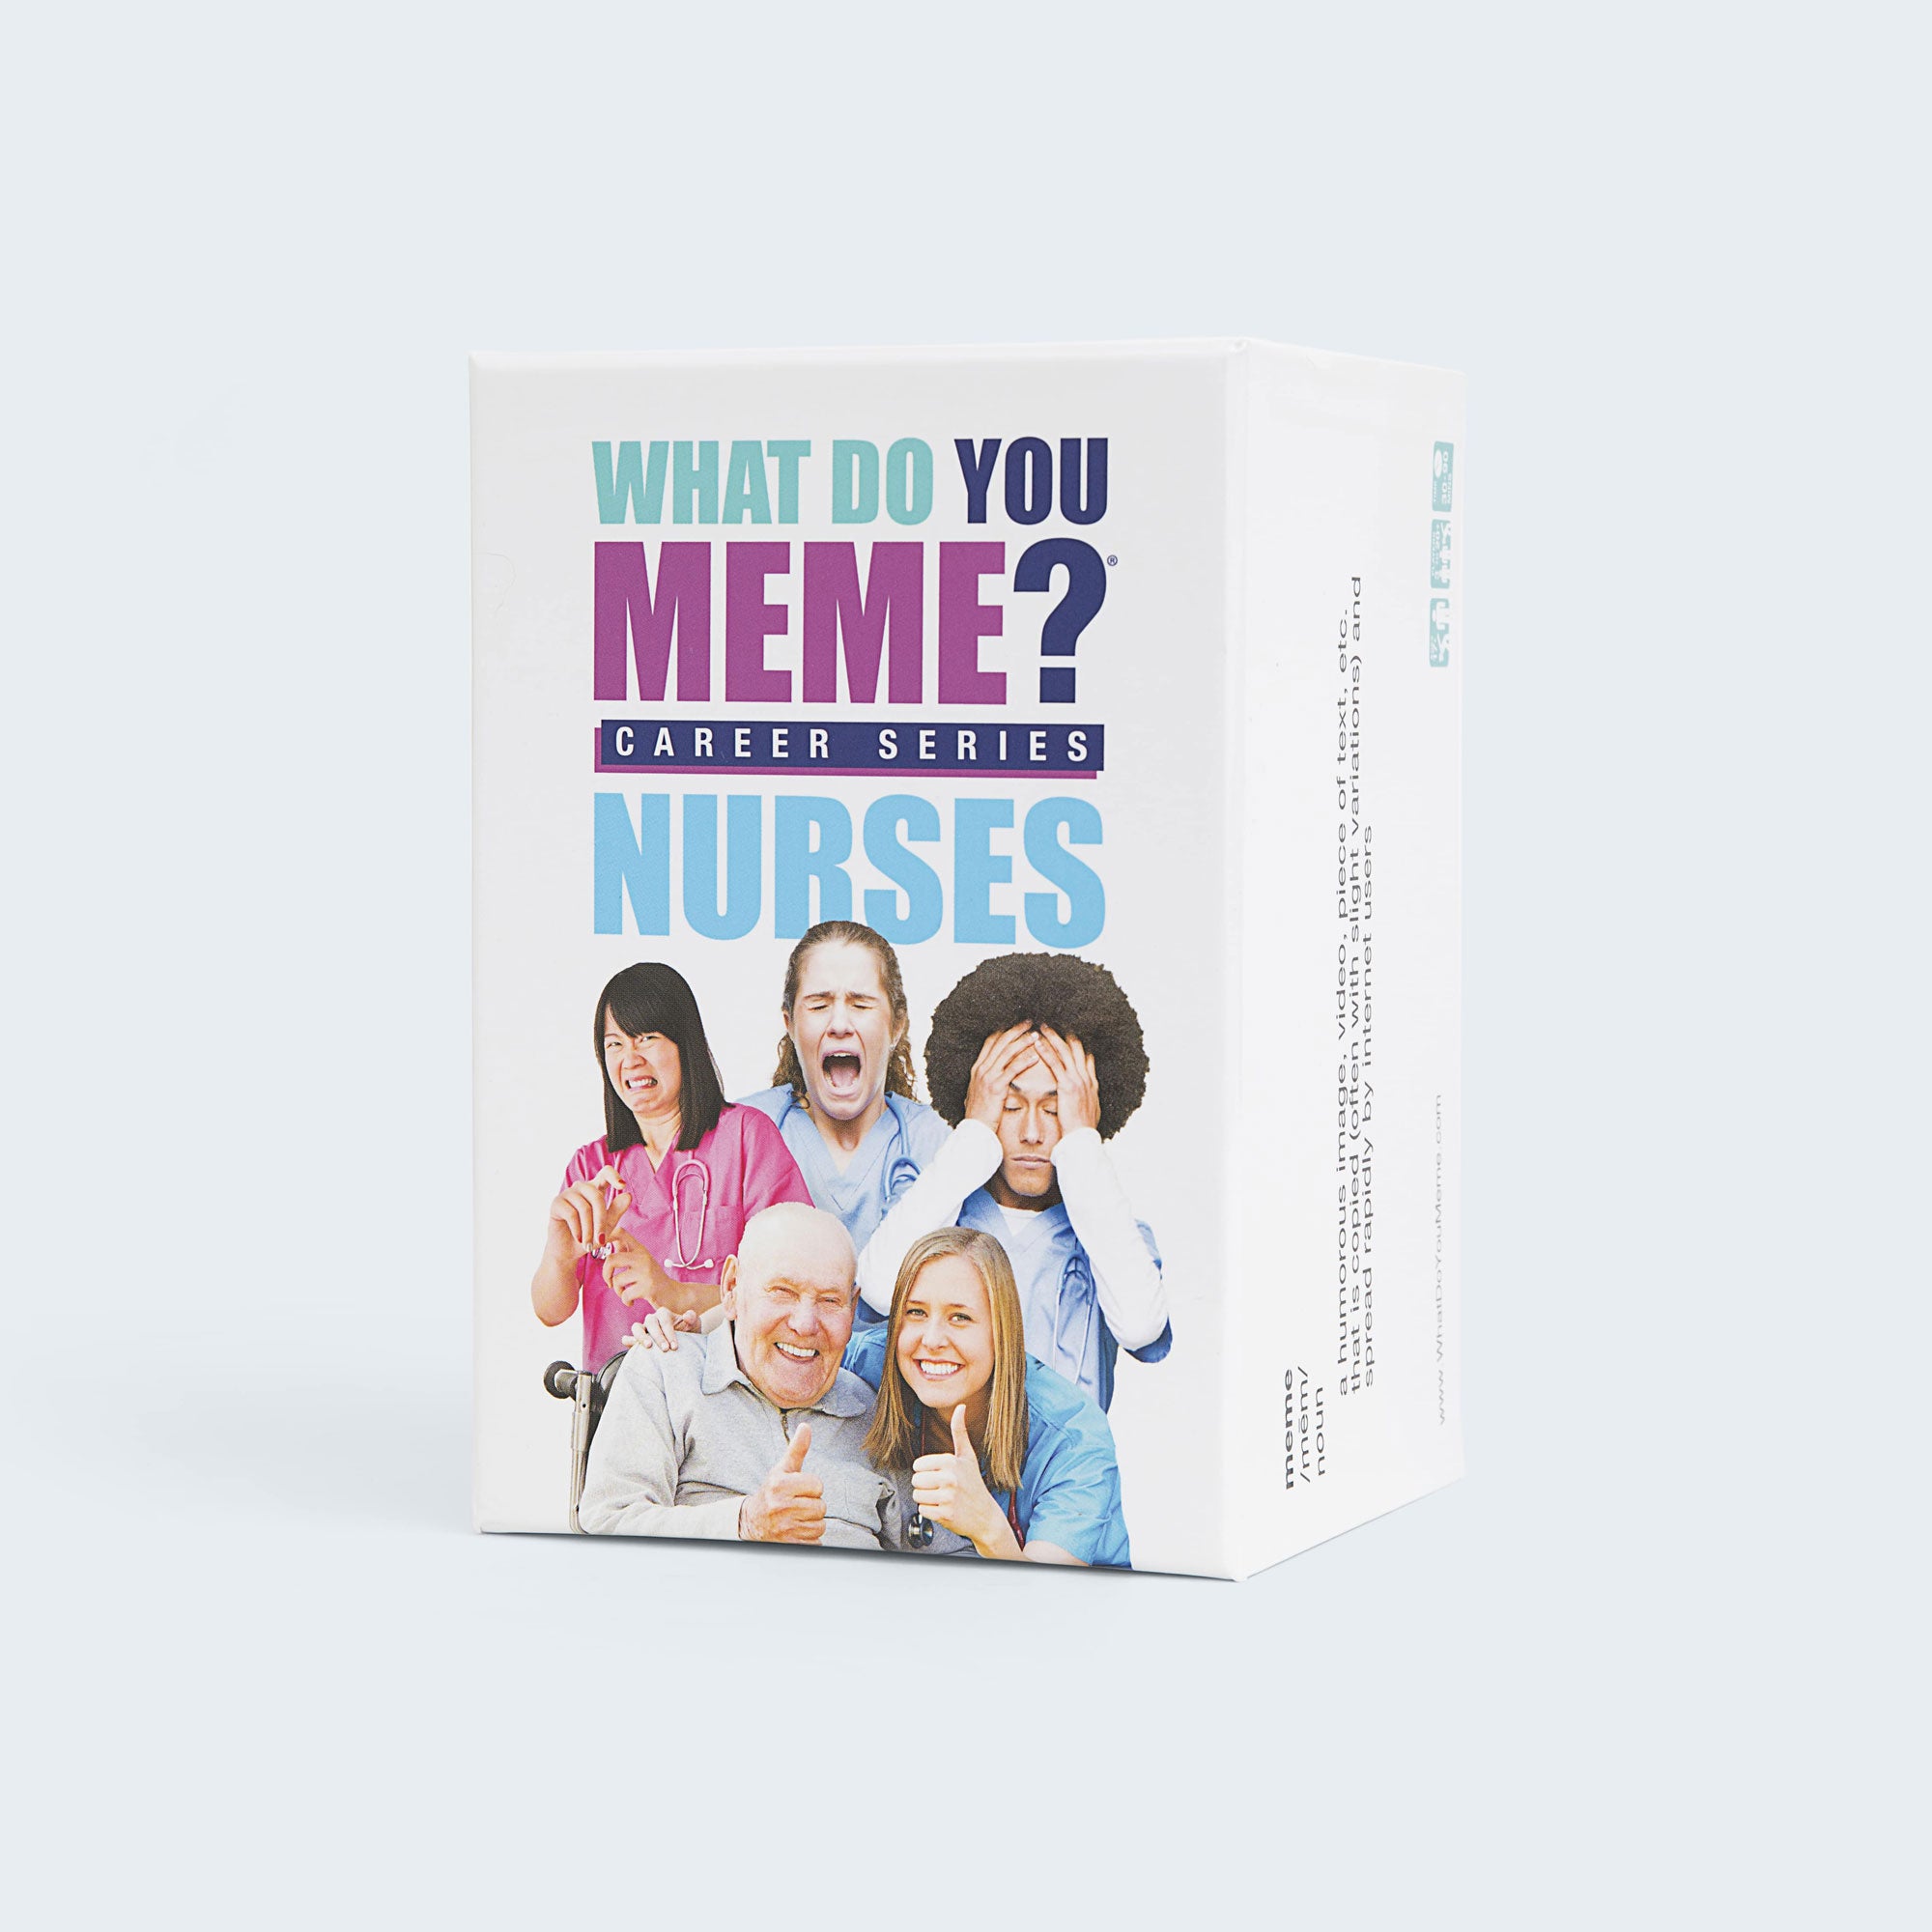 what-do-you-meme-career-series-nurses-game-box-and-game-play-03-what-do-you-meme-by-relatable